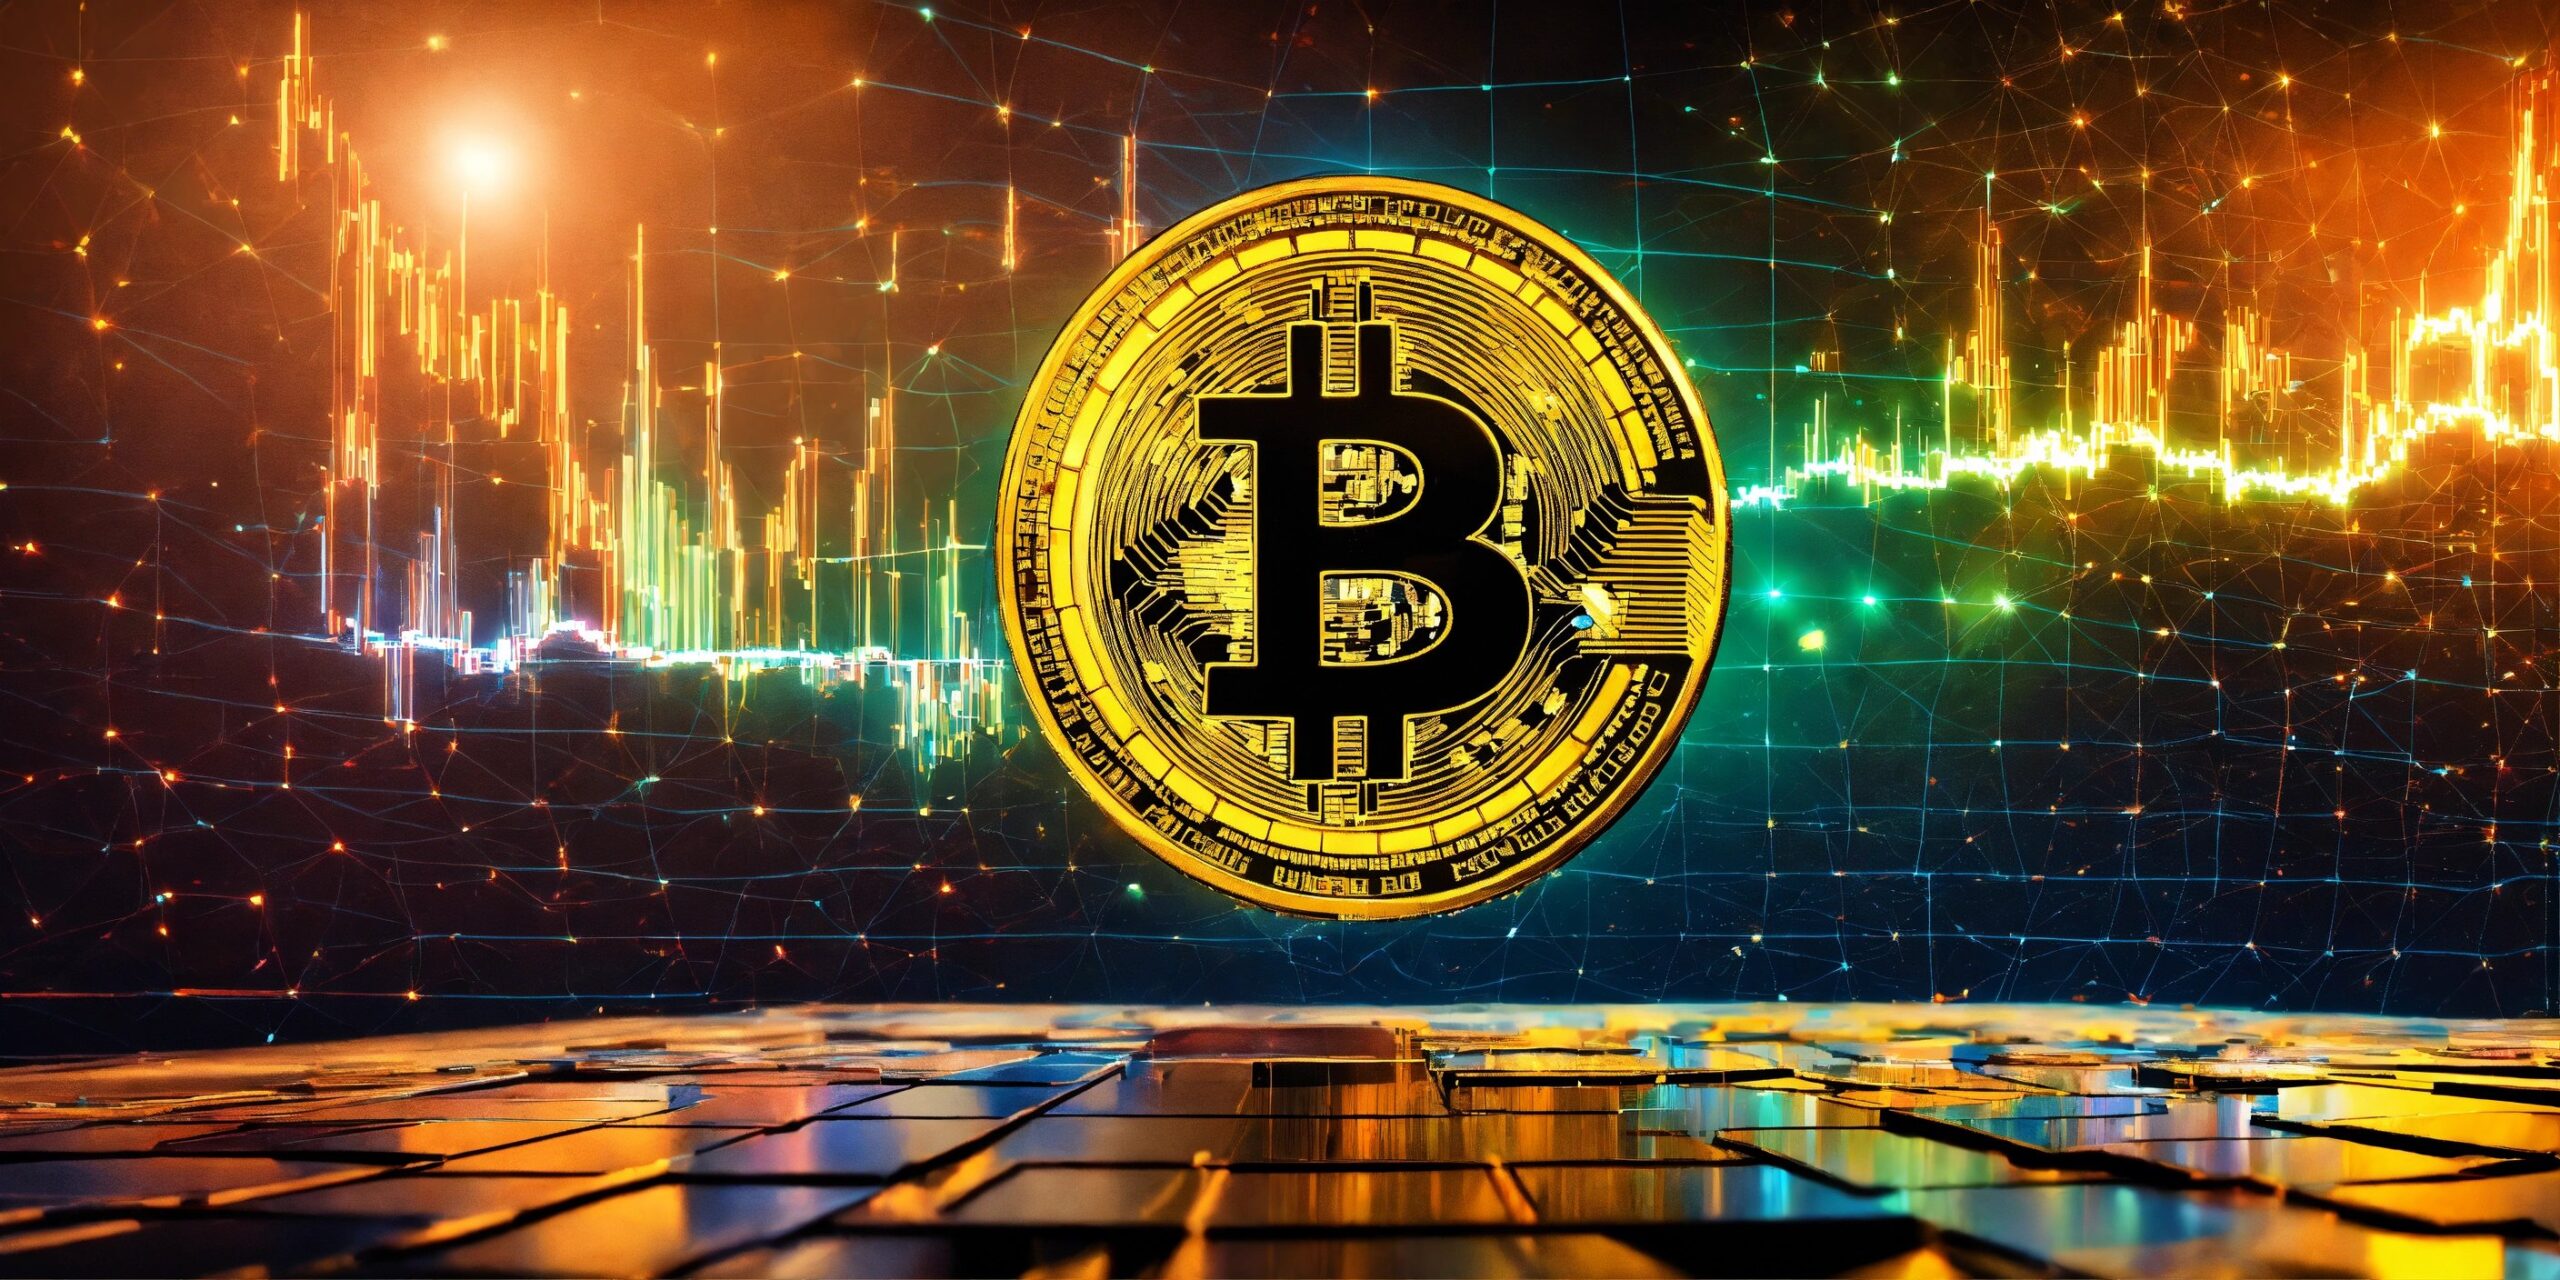 Bitcoin's Surging Momentum and the Impending Halving